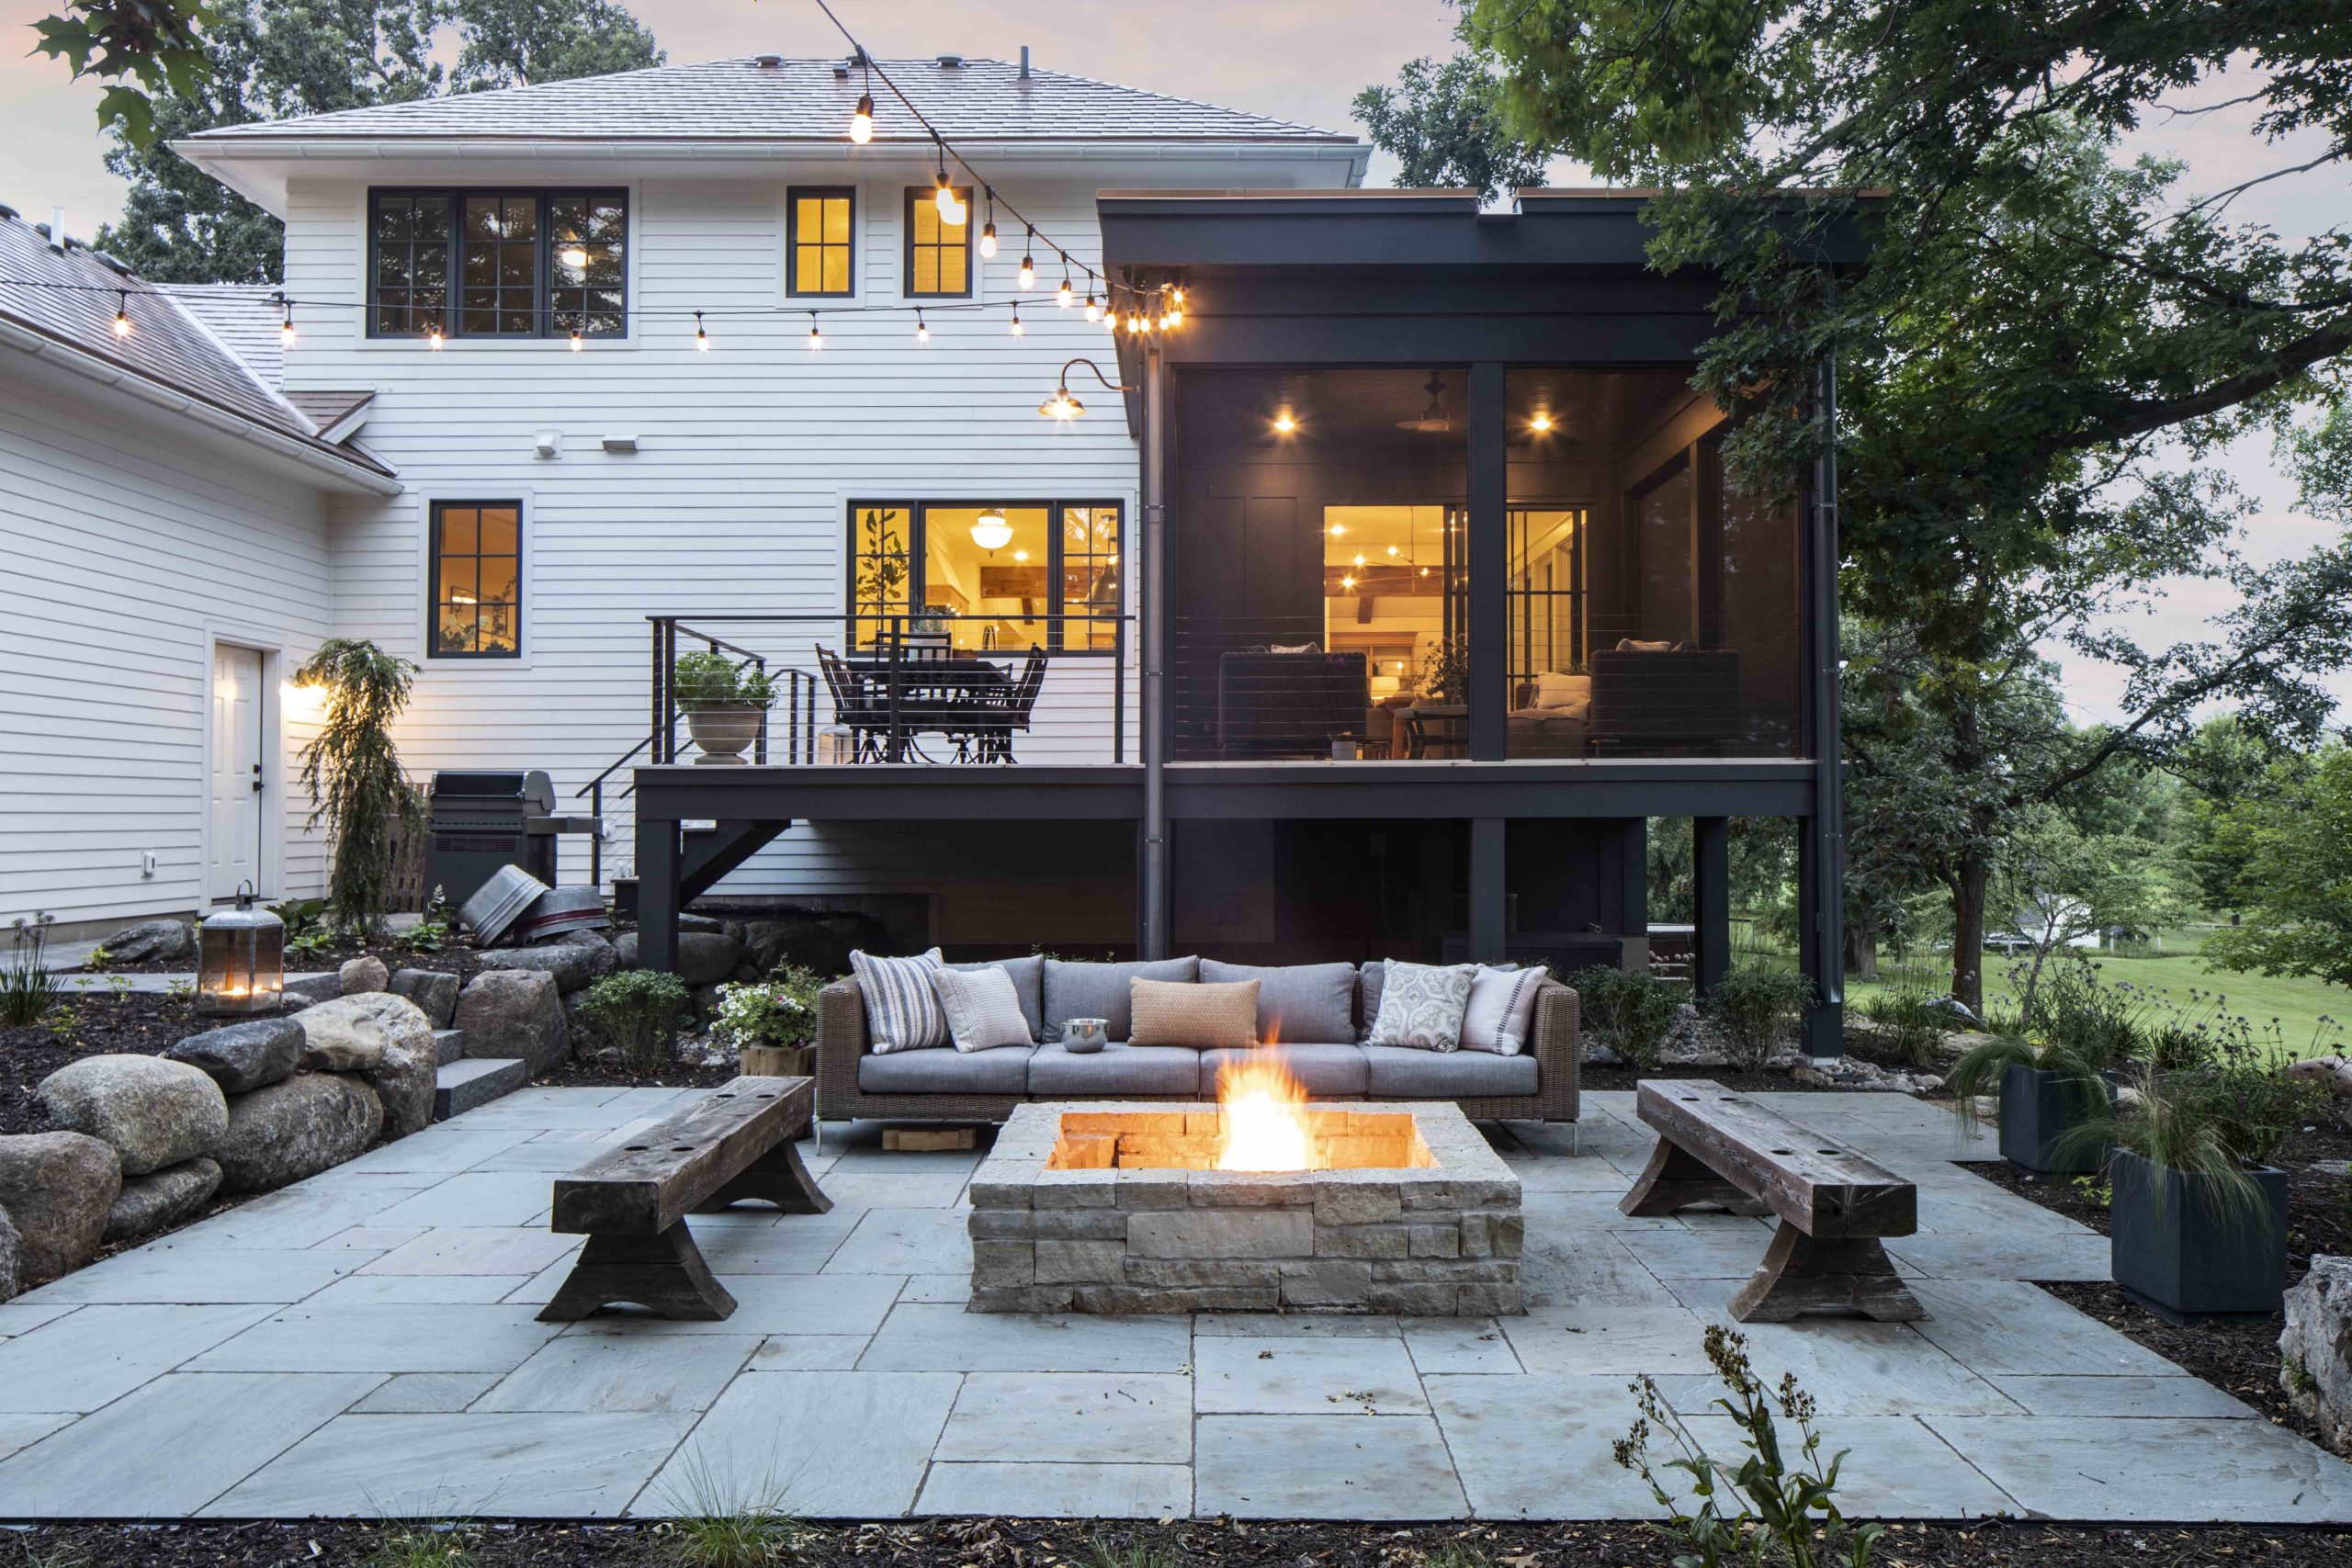 A prairie-style backyard with a fire pit and seating area in a custom home.